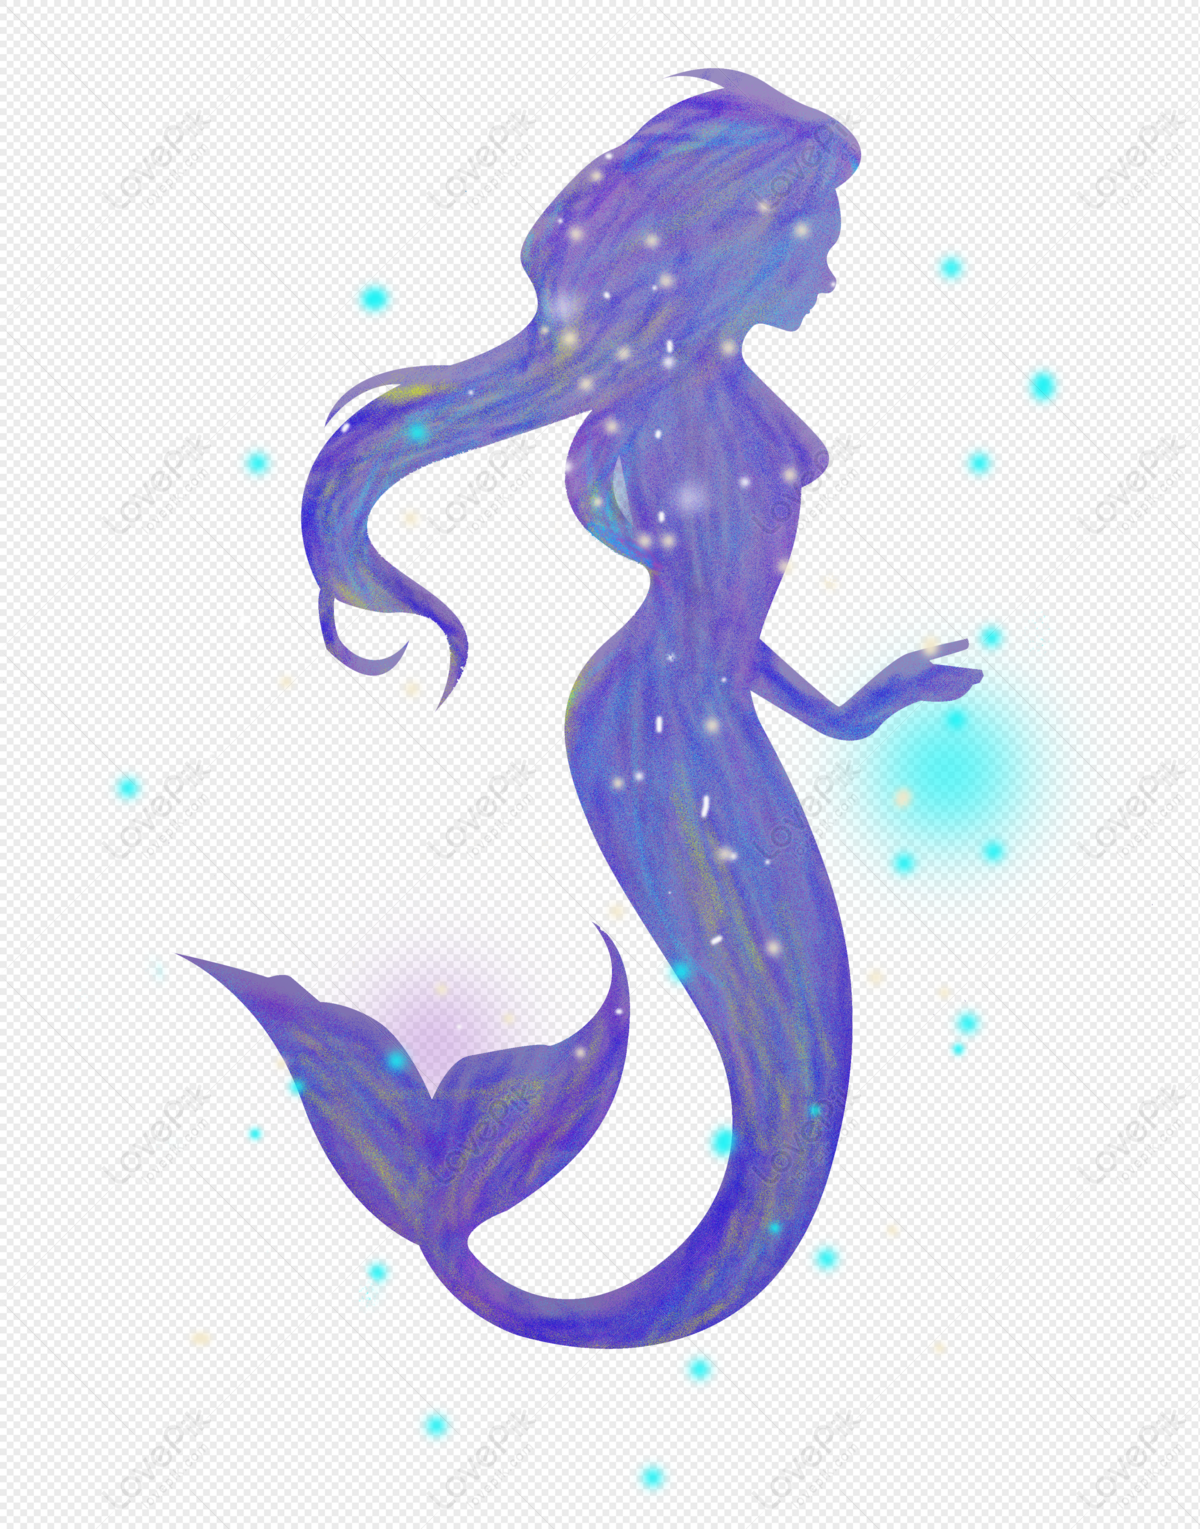 Hand Drawn Silhouette Of Mermaid Tail With Splashing Water. Graphic Tattoo.  Royalty Free SVG, Cliparts, Vectors, and Stock Illustration. Image  173715801.